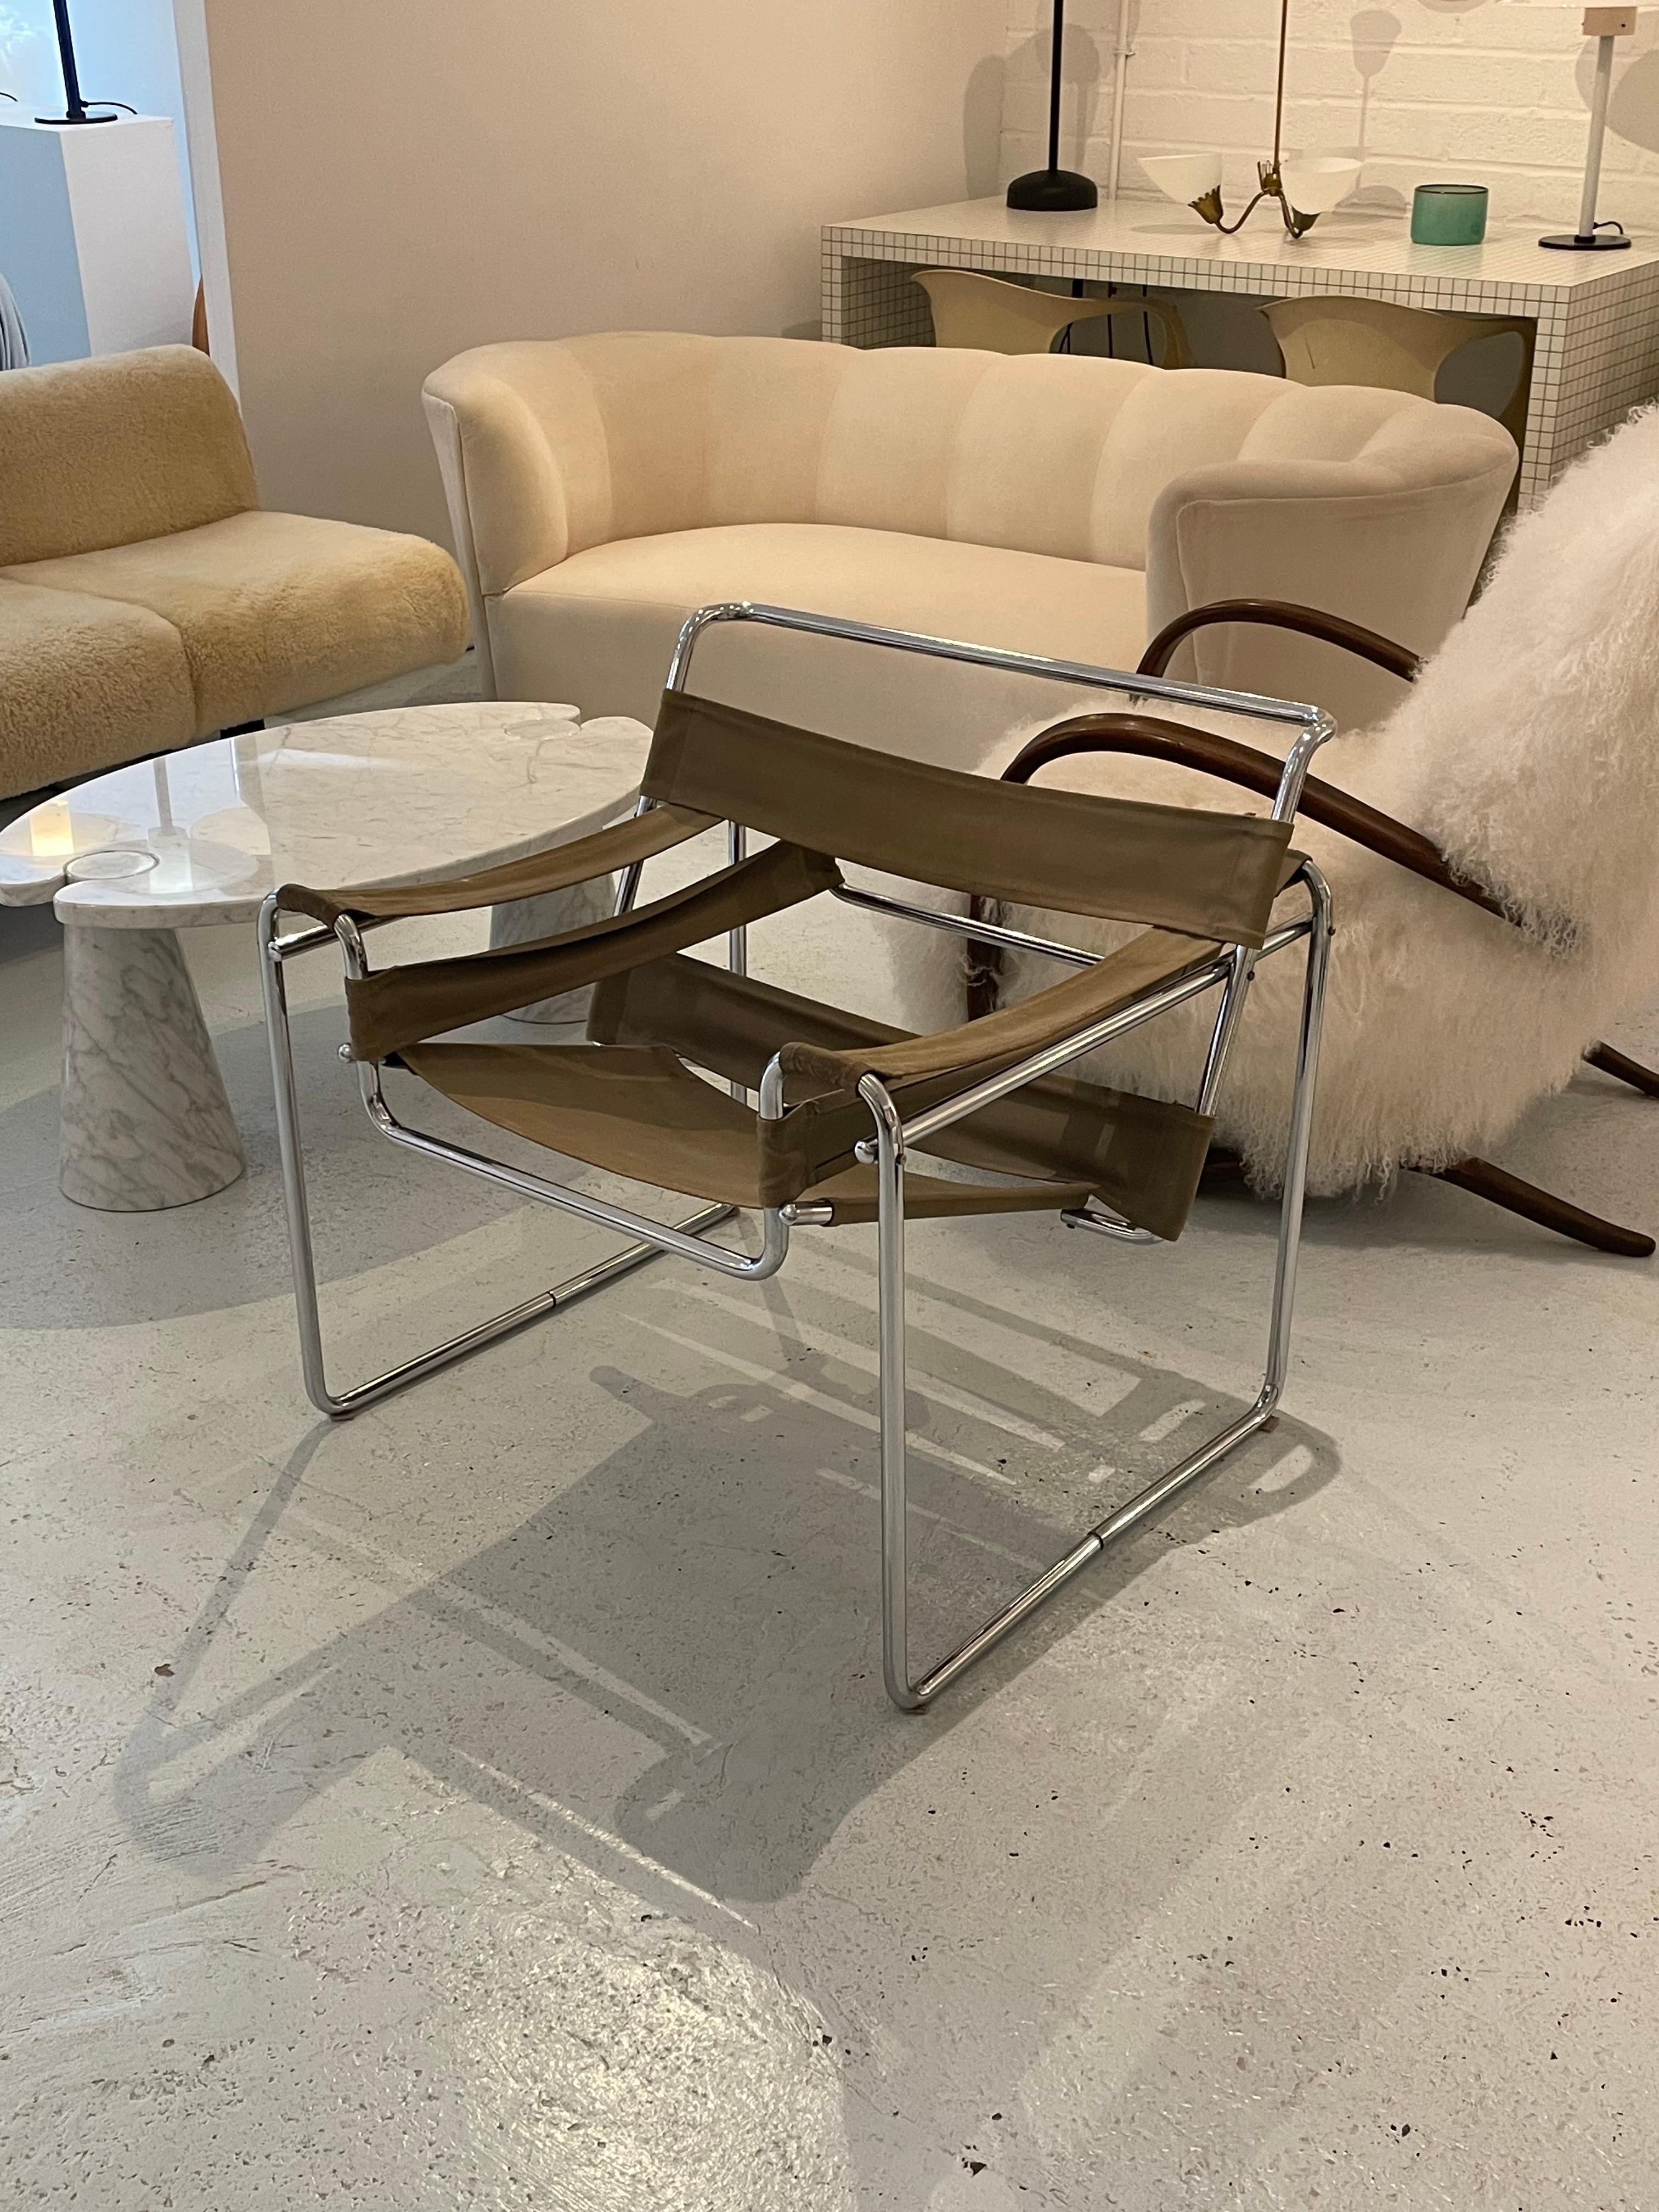 The Wassily Chair, also known as the Model B3 chair, is a famous and iconic piece of modern furniture design. It was designed by Marcel Breuer in 1925-1926 while he was working at the Bauhaus, a renowned German art school that played a significant